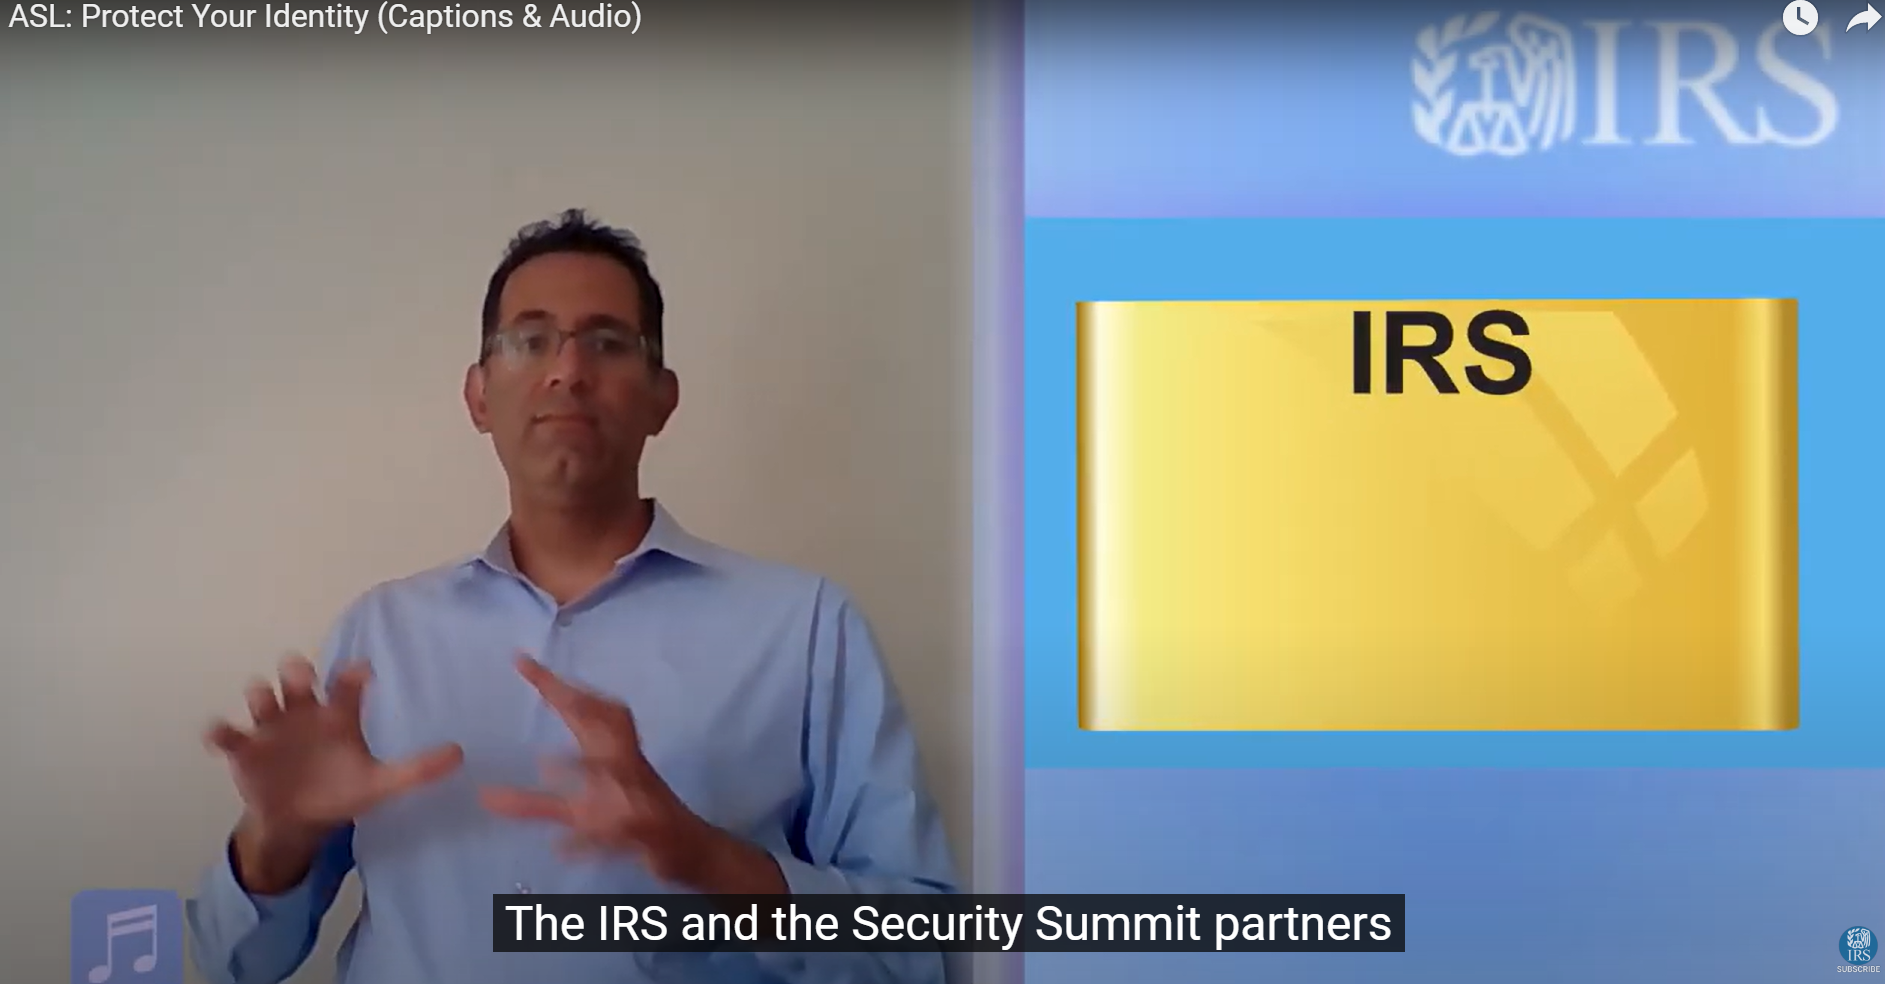 Help the IRS protect your identity.